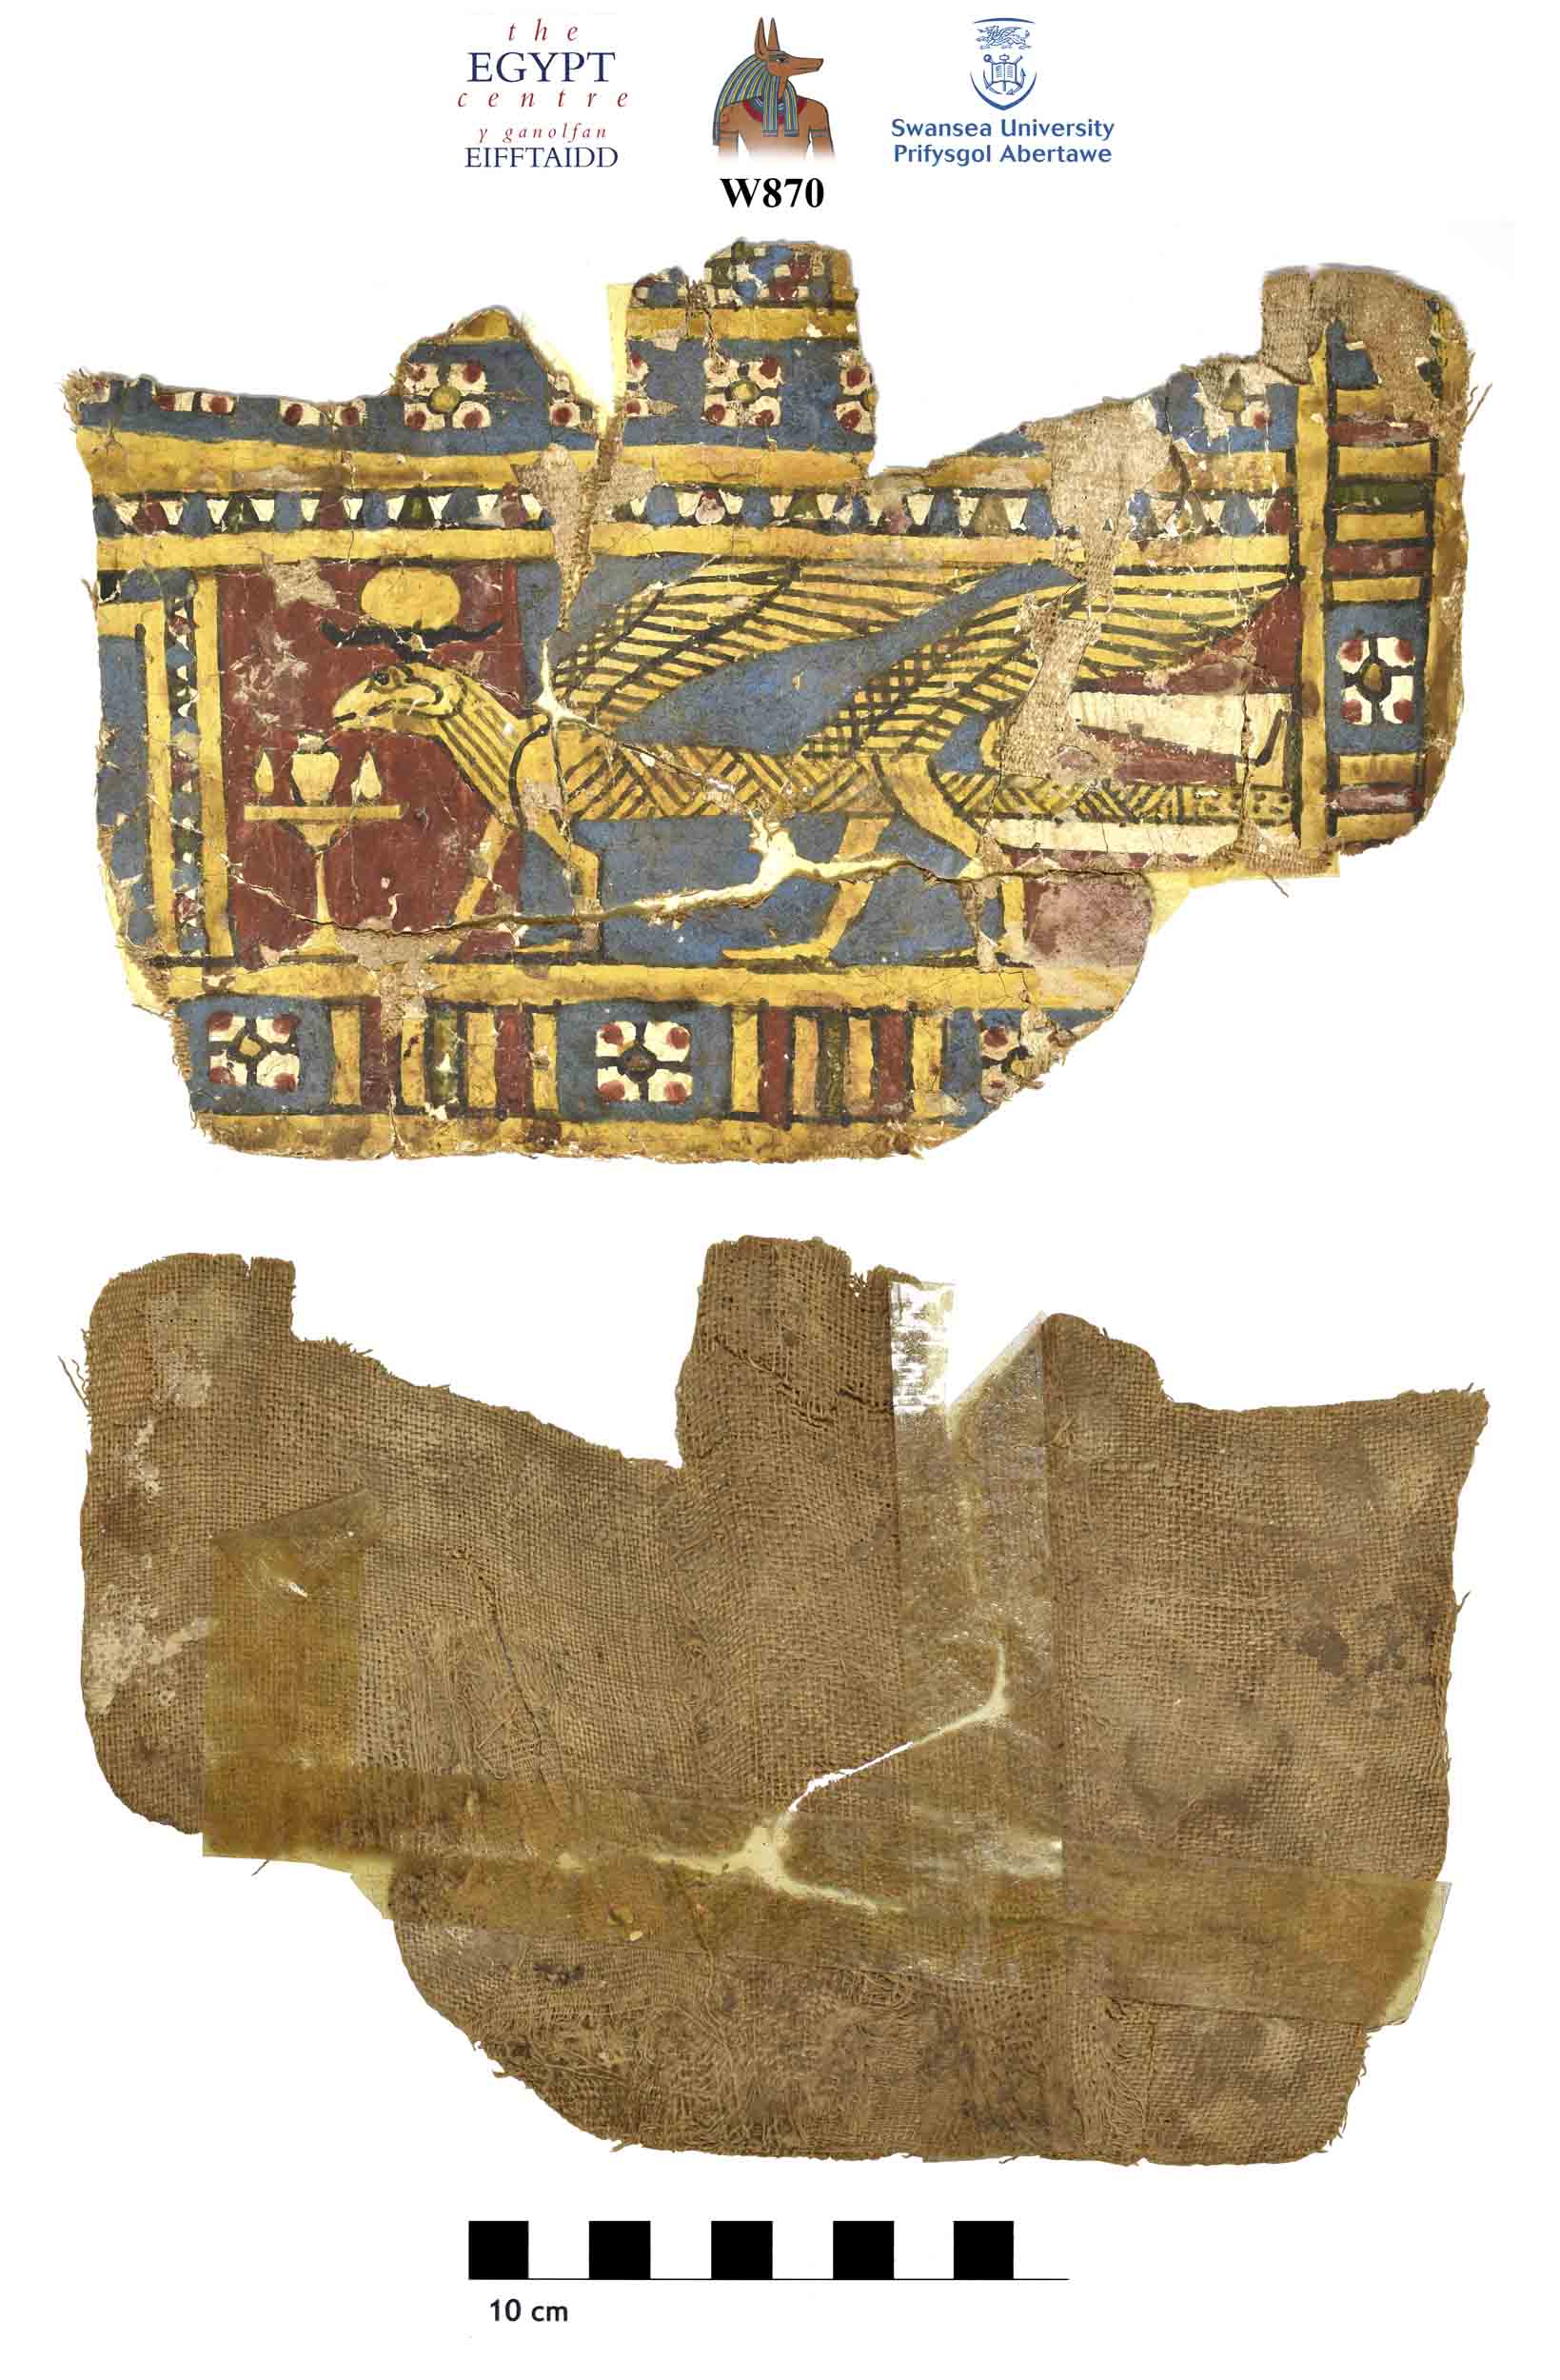 Image for: Fragment of cartonnage